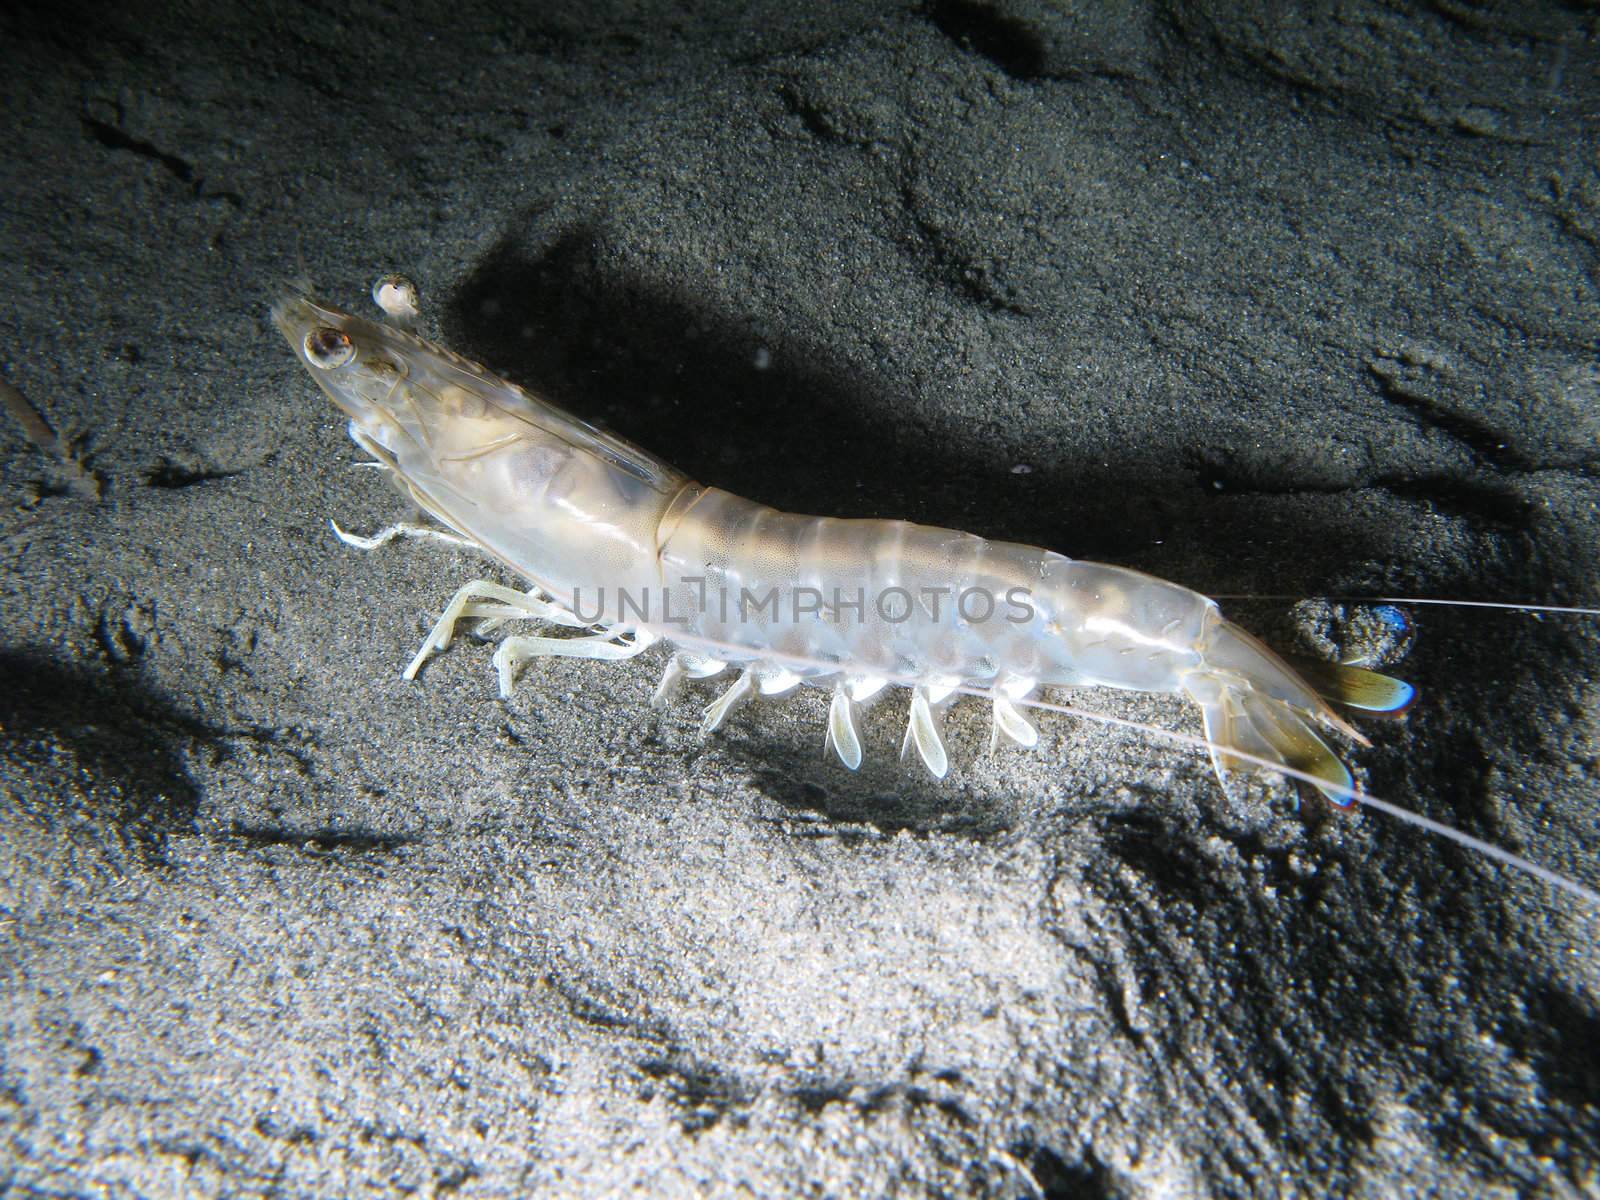 Prawn on the sand. Shotted in the wild, nighttime.